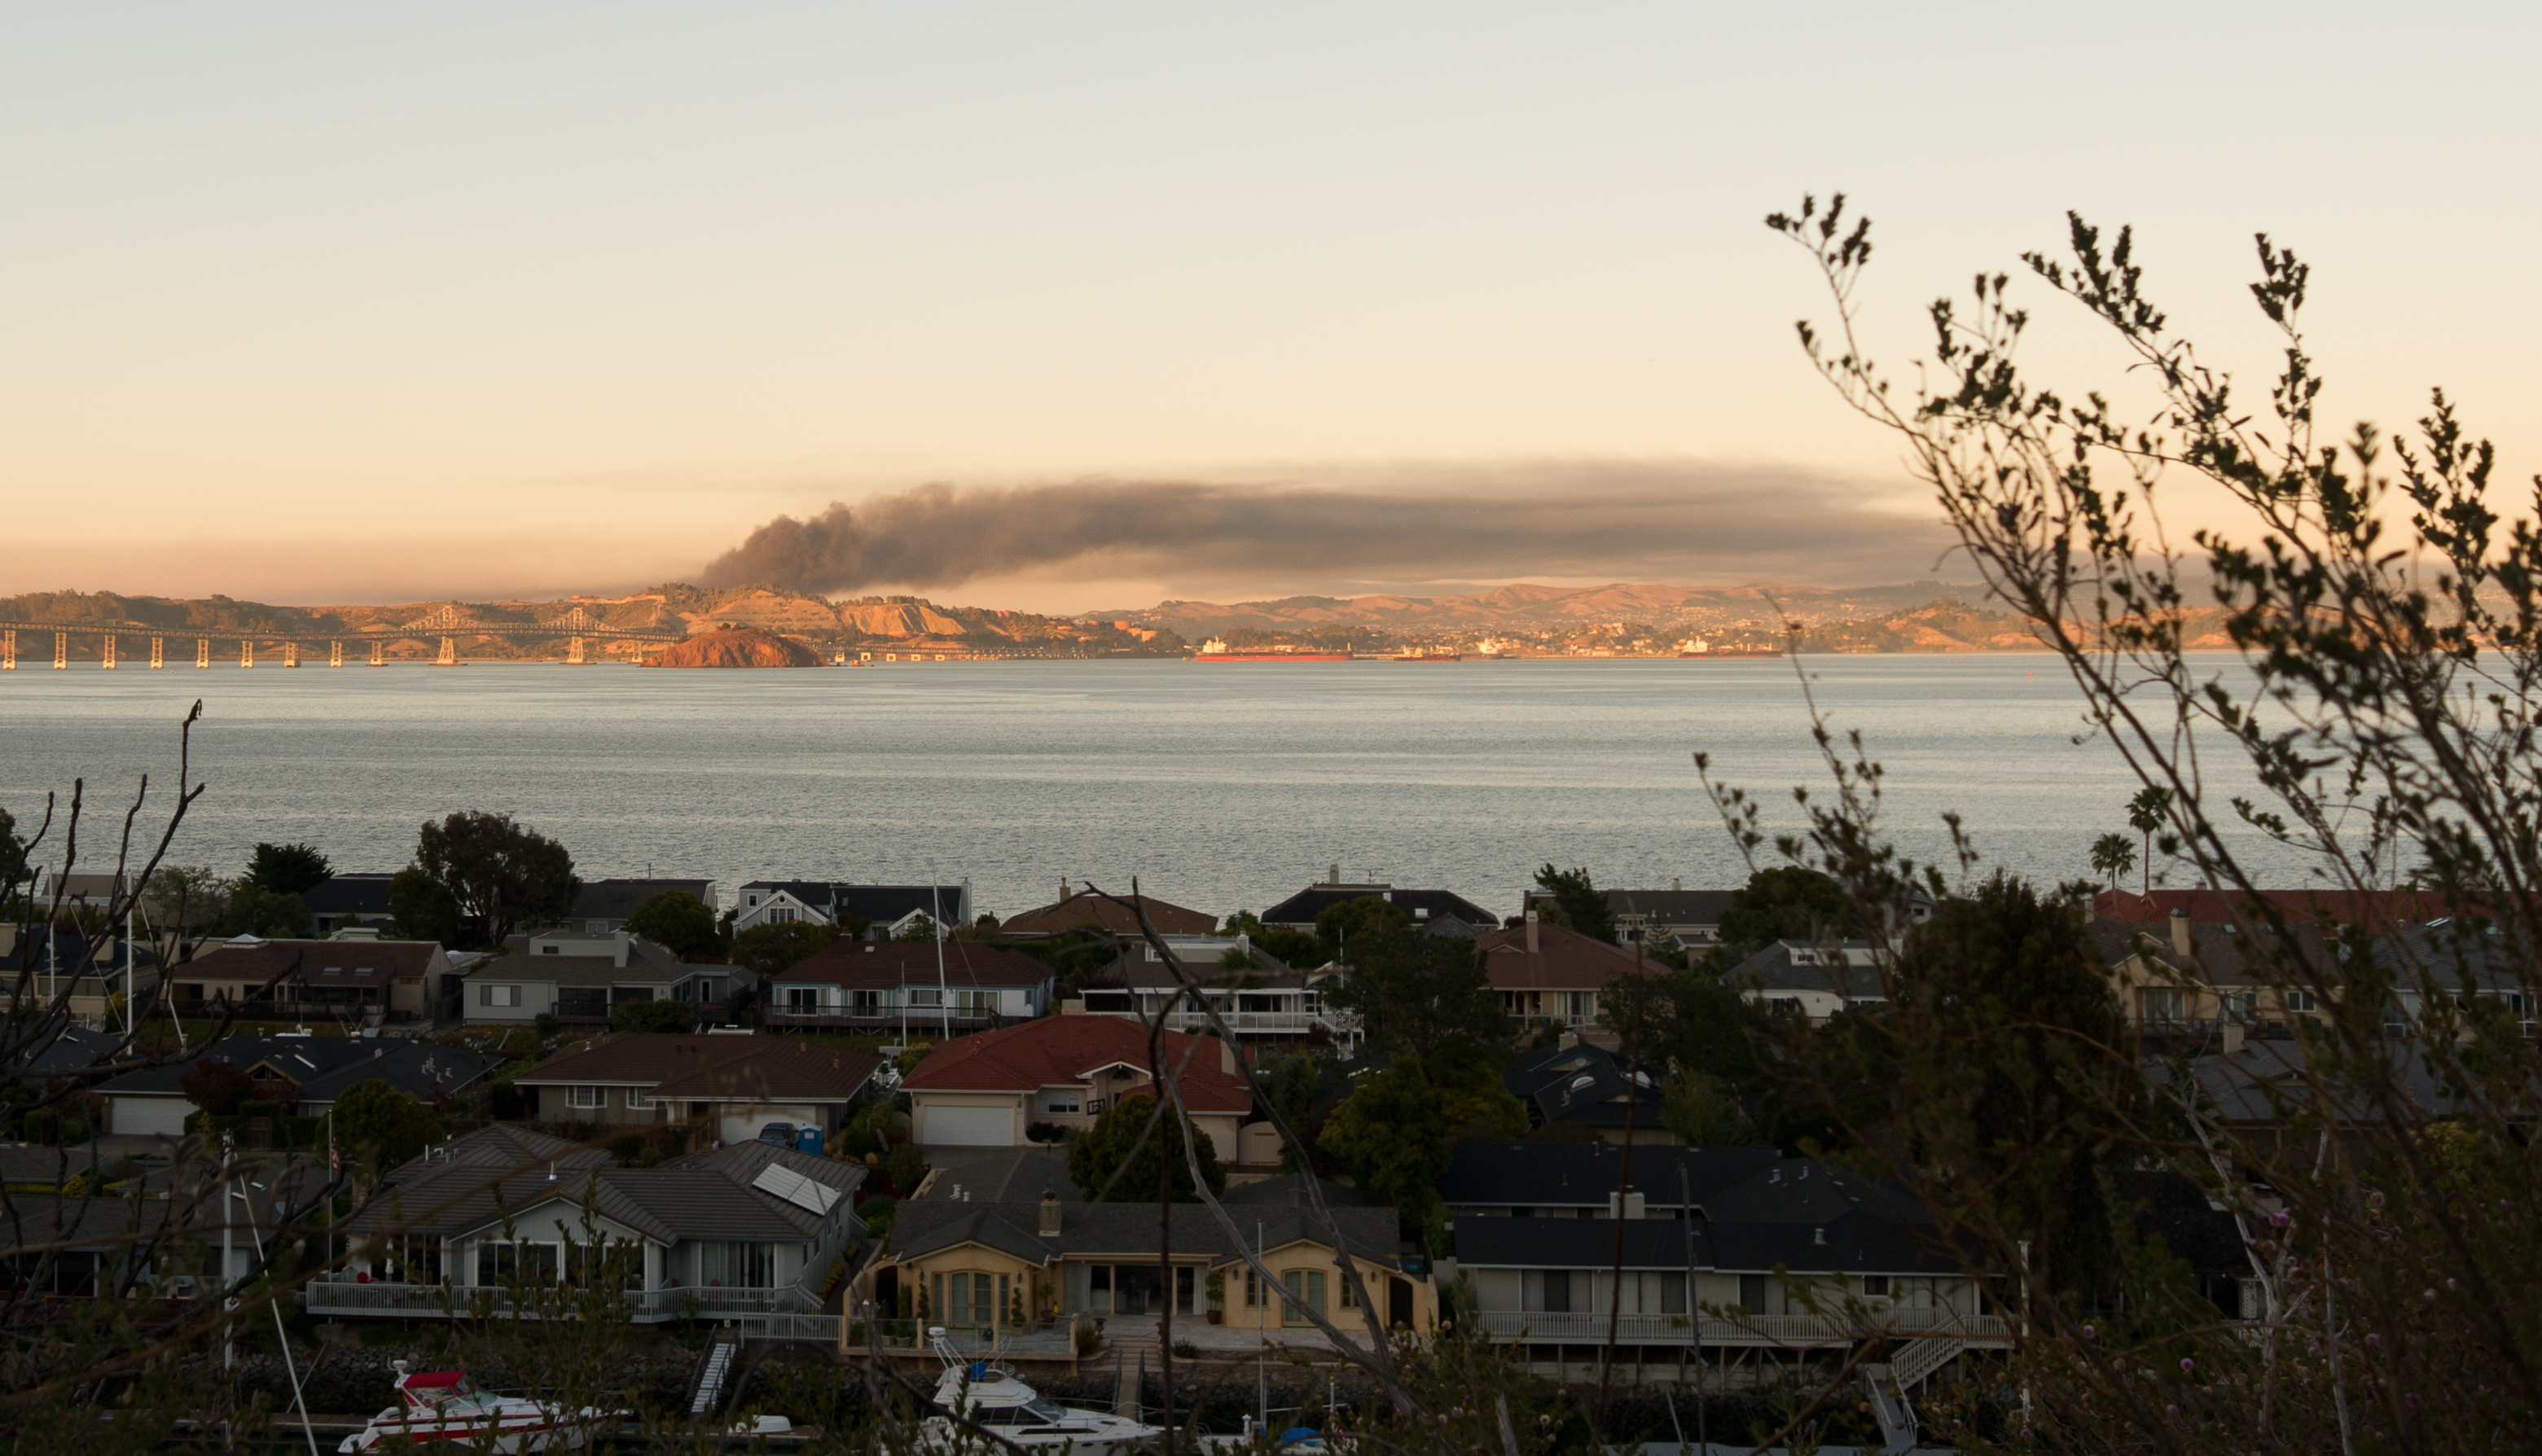 A view of smoke across the Bay from a fire at an oil refinery.